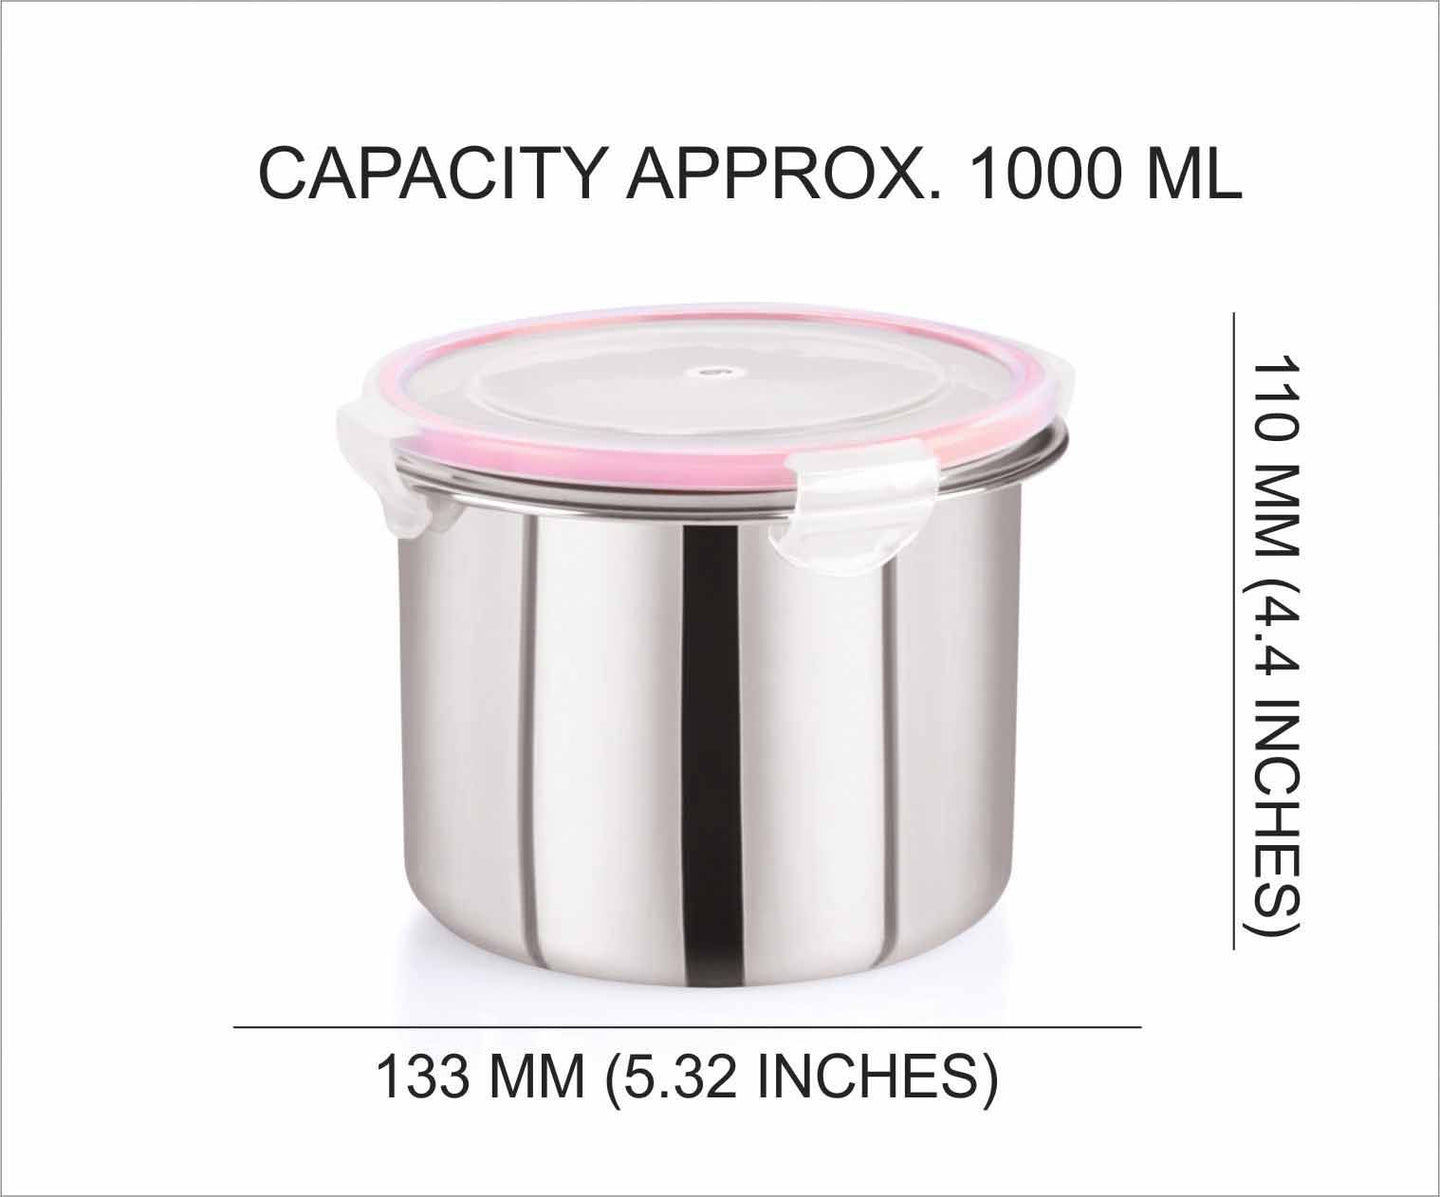 "Flip & Seal" Stainless Steel Airtight Flat Storage Container Set of 2 ( 1000mLx2)